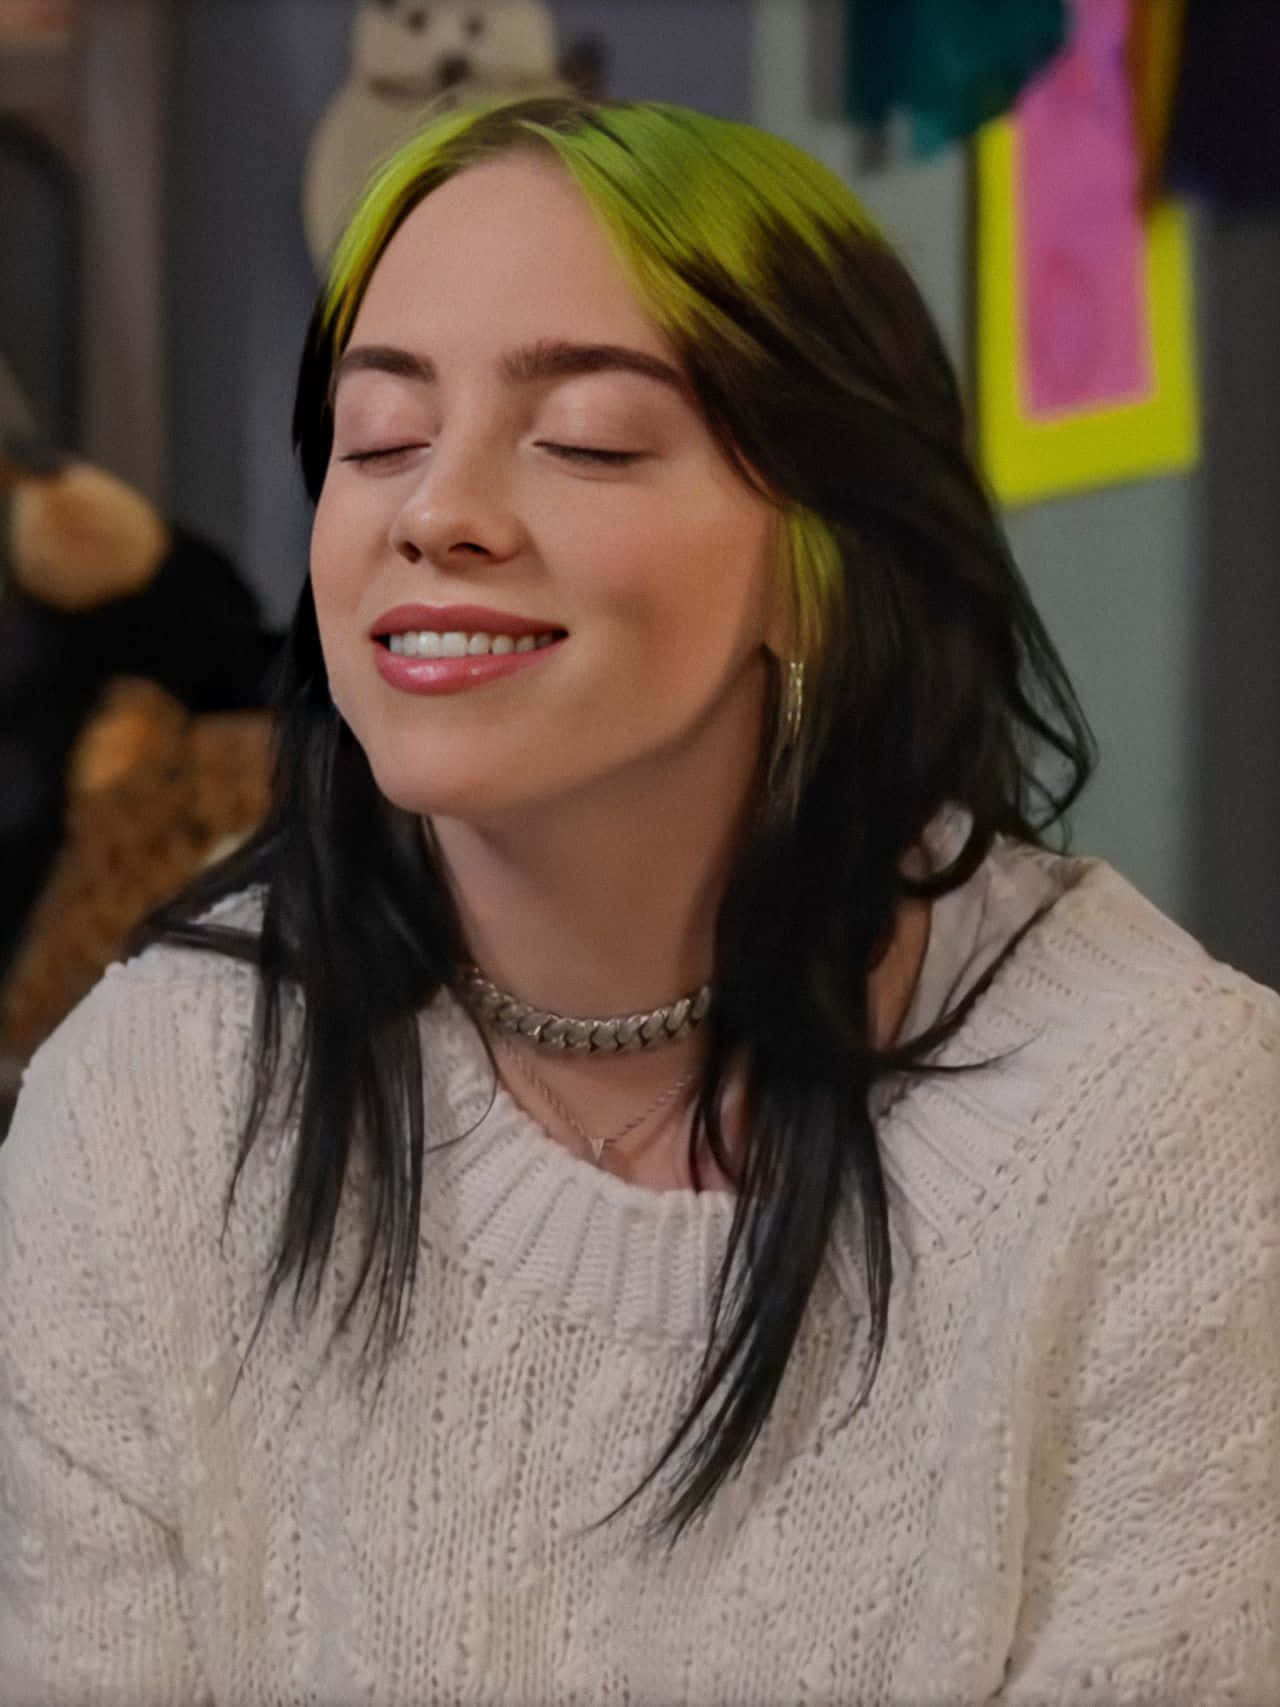 Billie Eilish smiling with her signature black and green hair Wallpaper